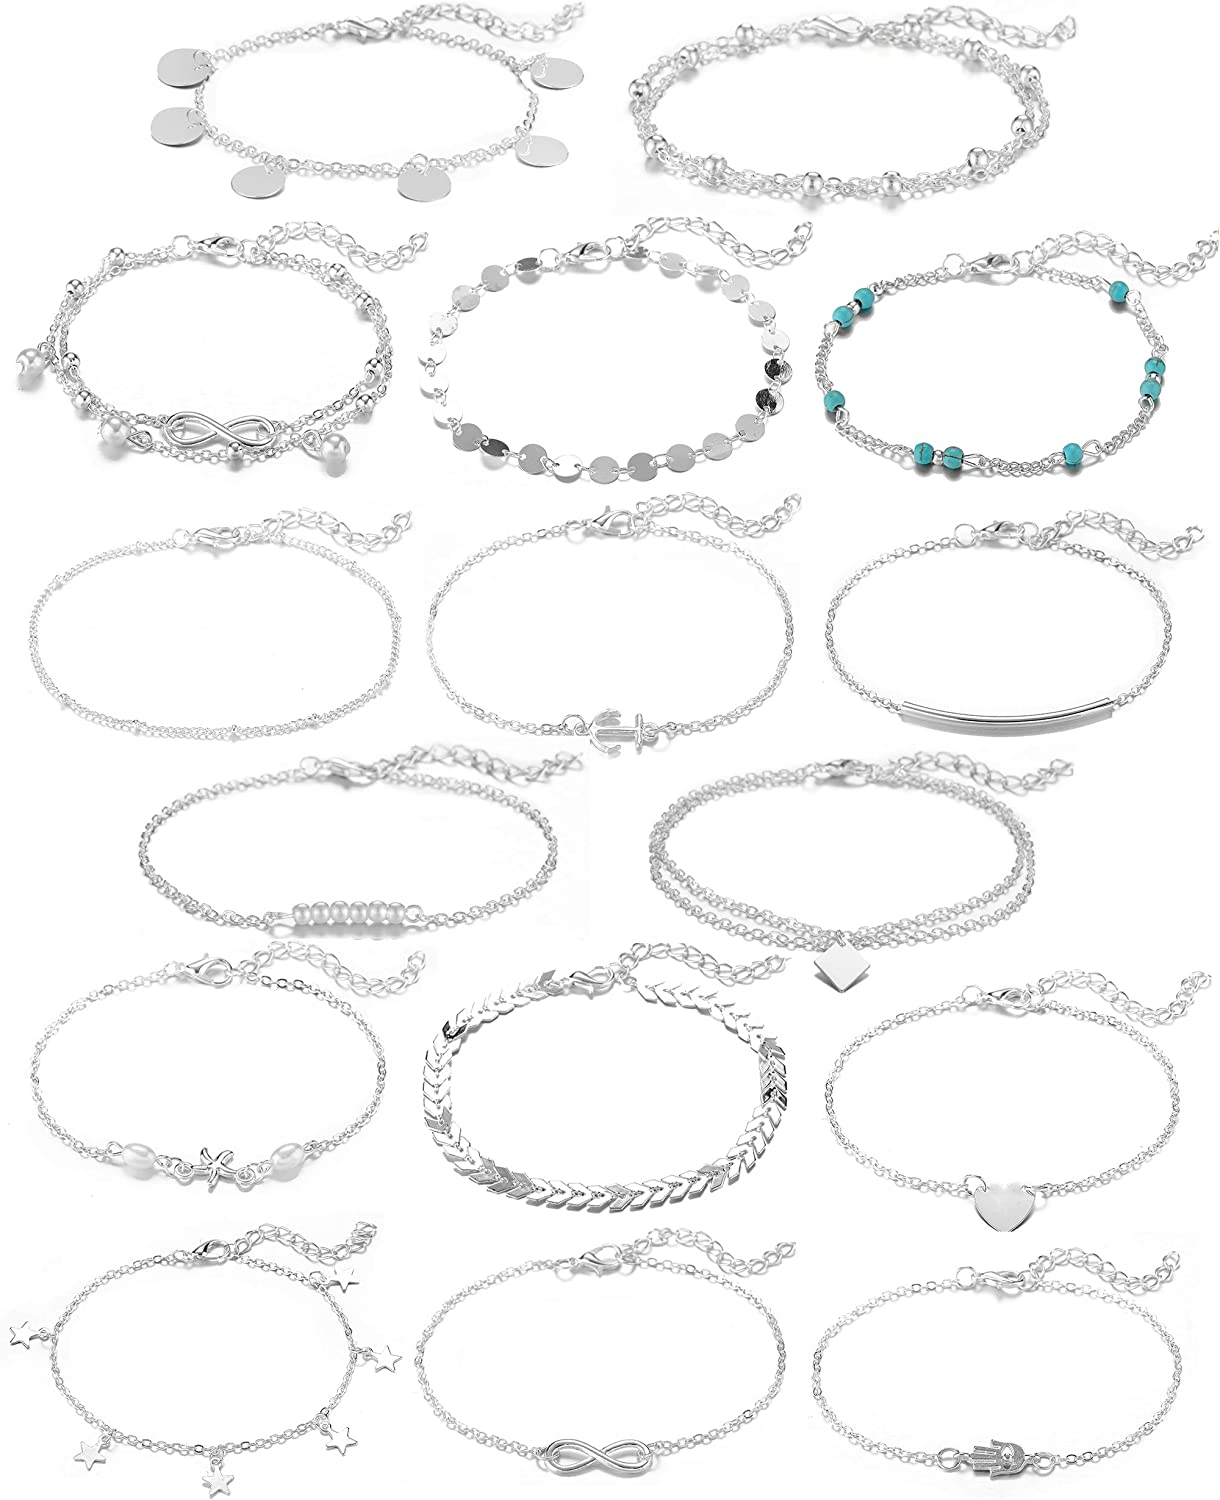 Softones 16Pcs Ankle Bracelets for Women Girls Gold Silver Two Style Chain Beach Anklet Bracelet Jewelry Anklet Set,Adjustable Size